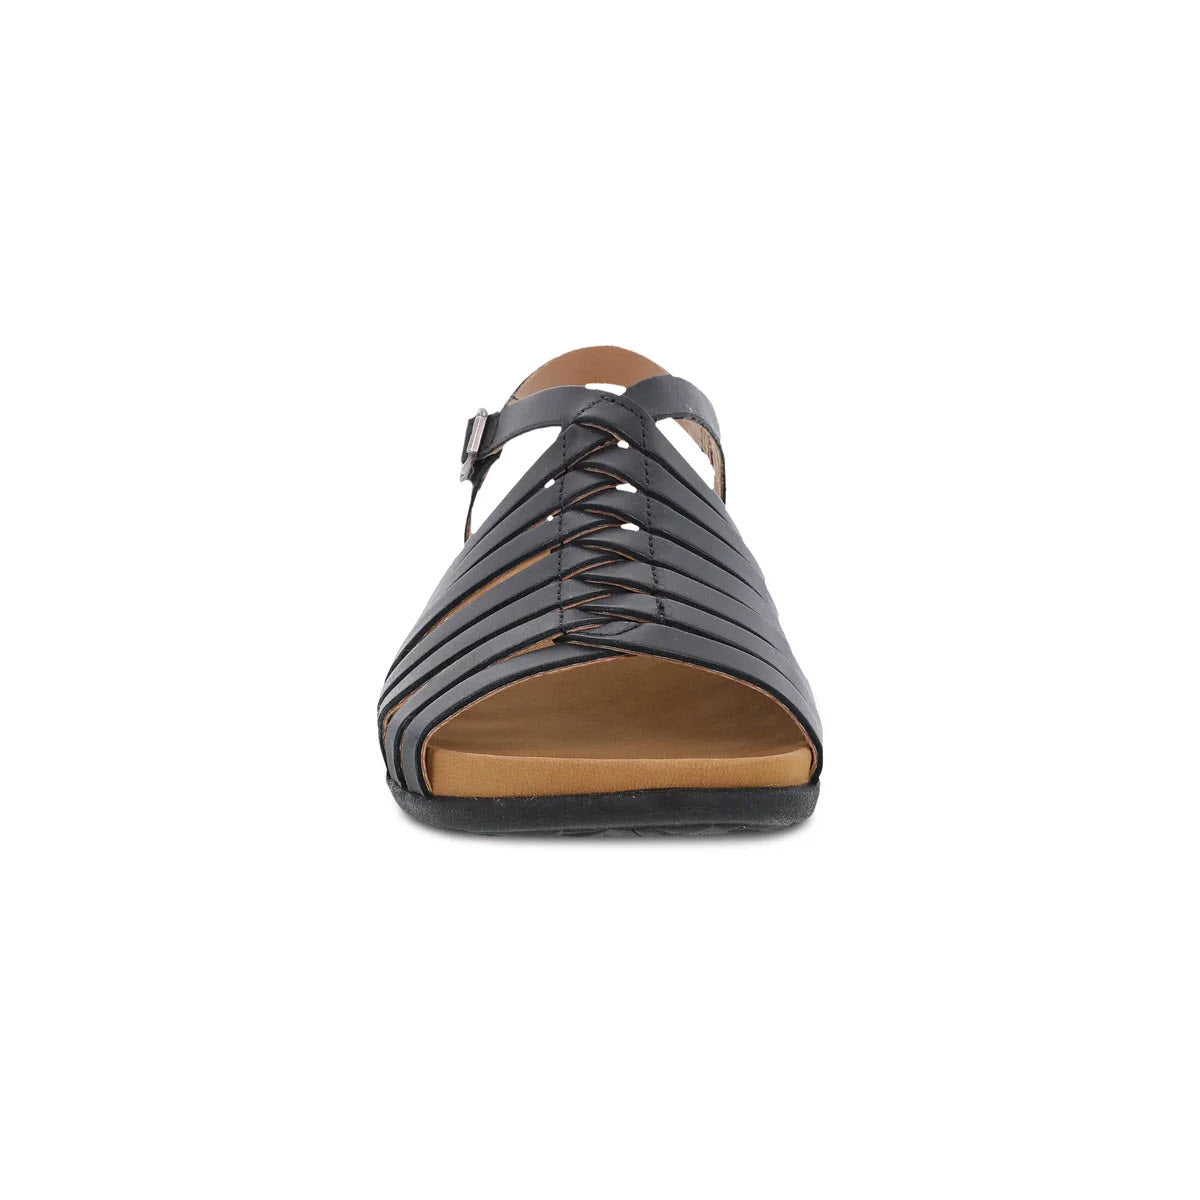 Dansko Jennifer Black strappy sandal with a cushioned sole, viewed from the top against a white background.